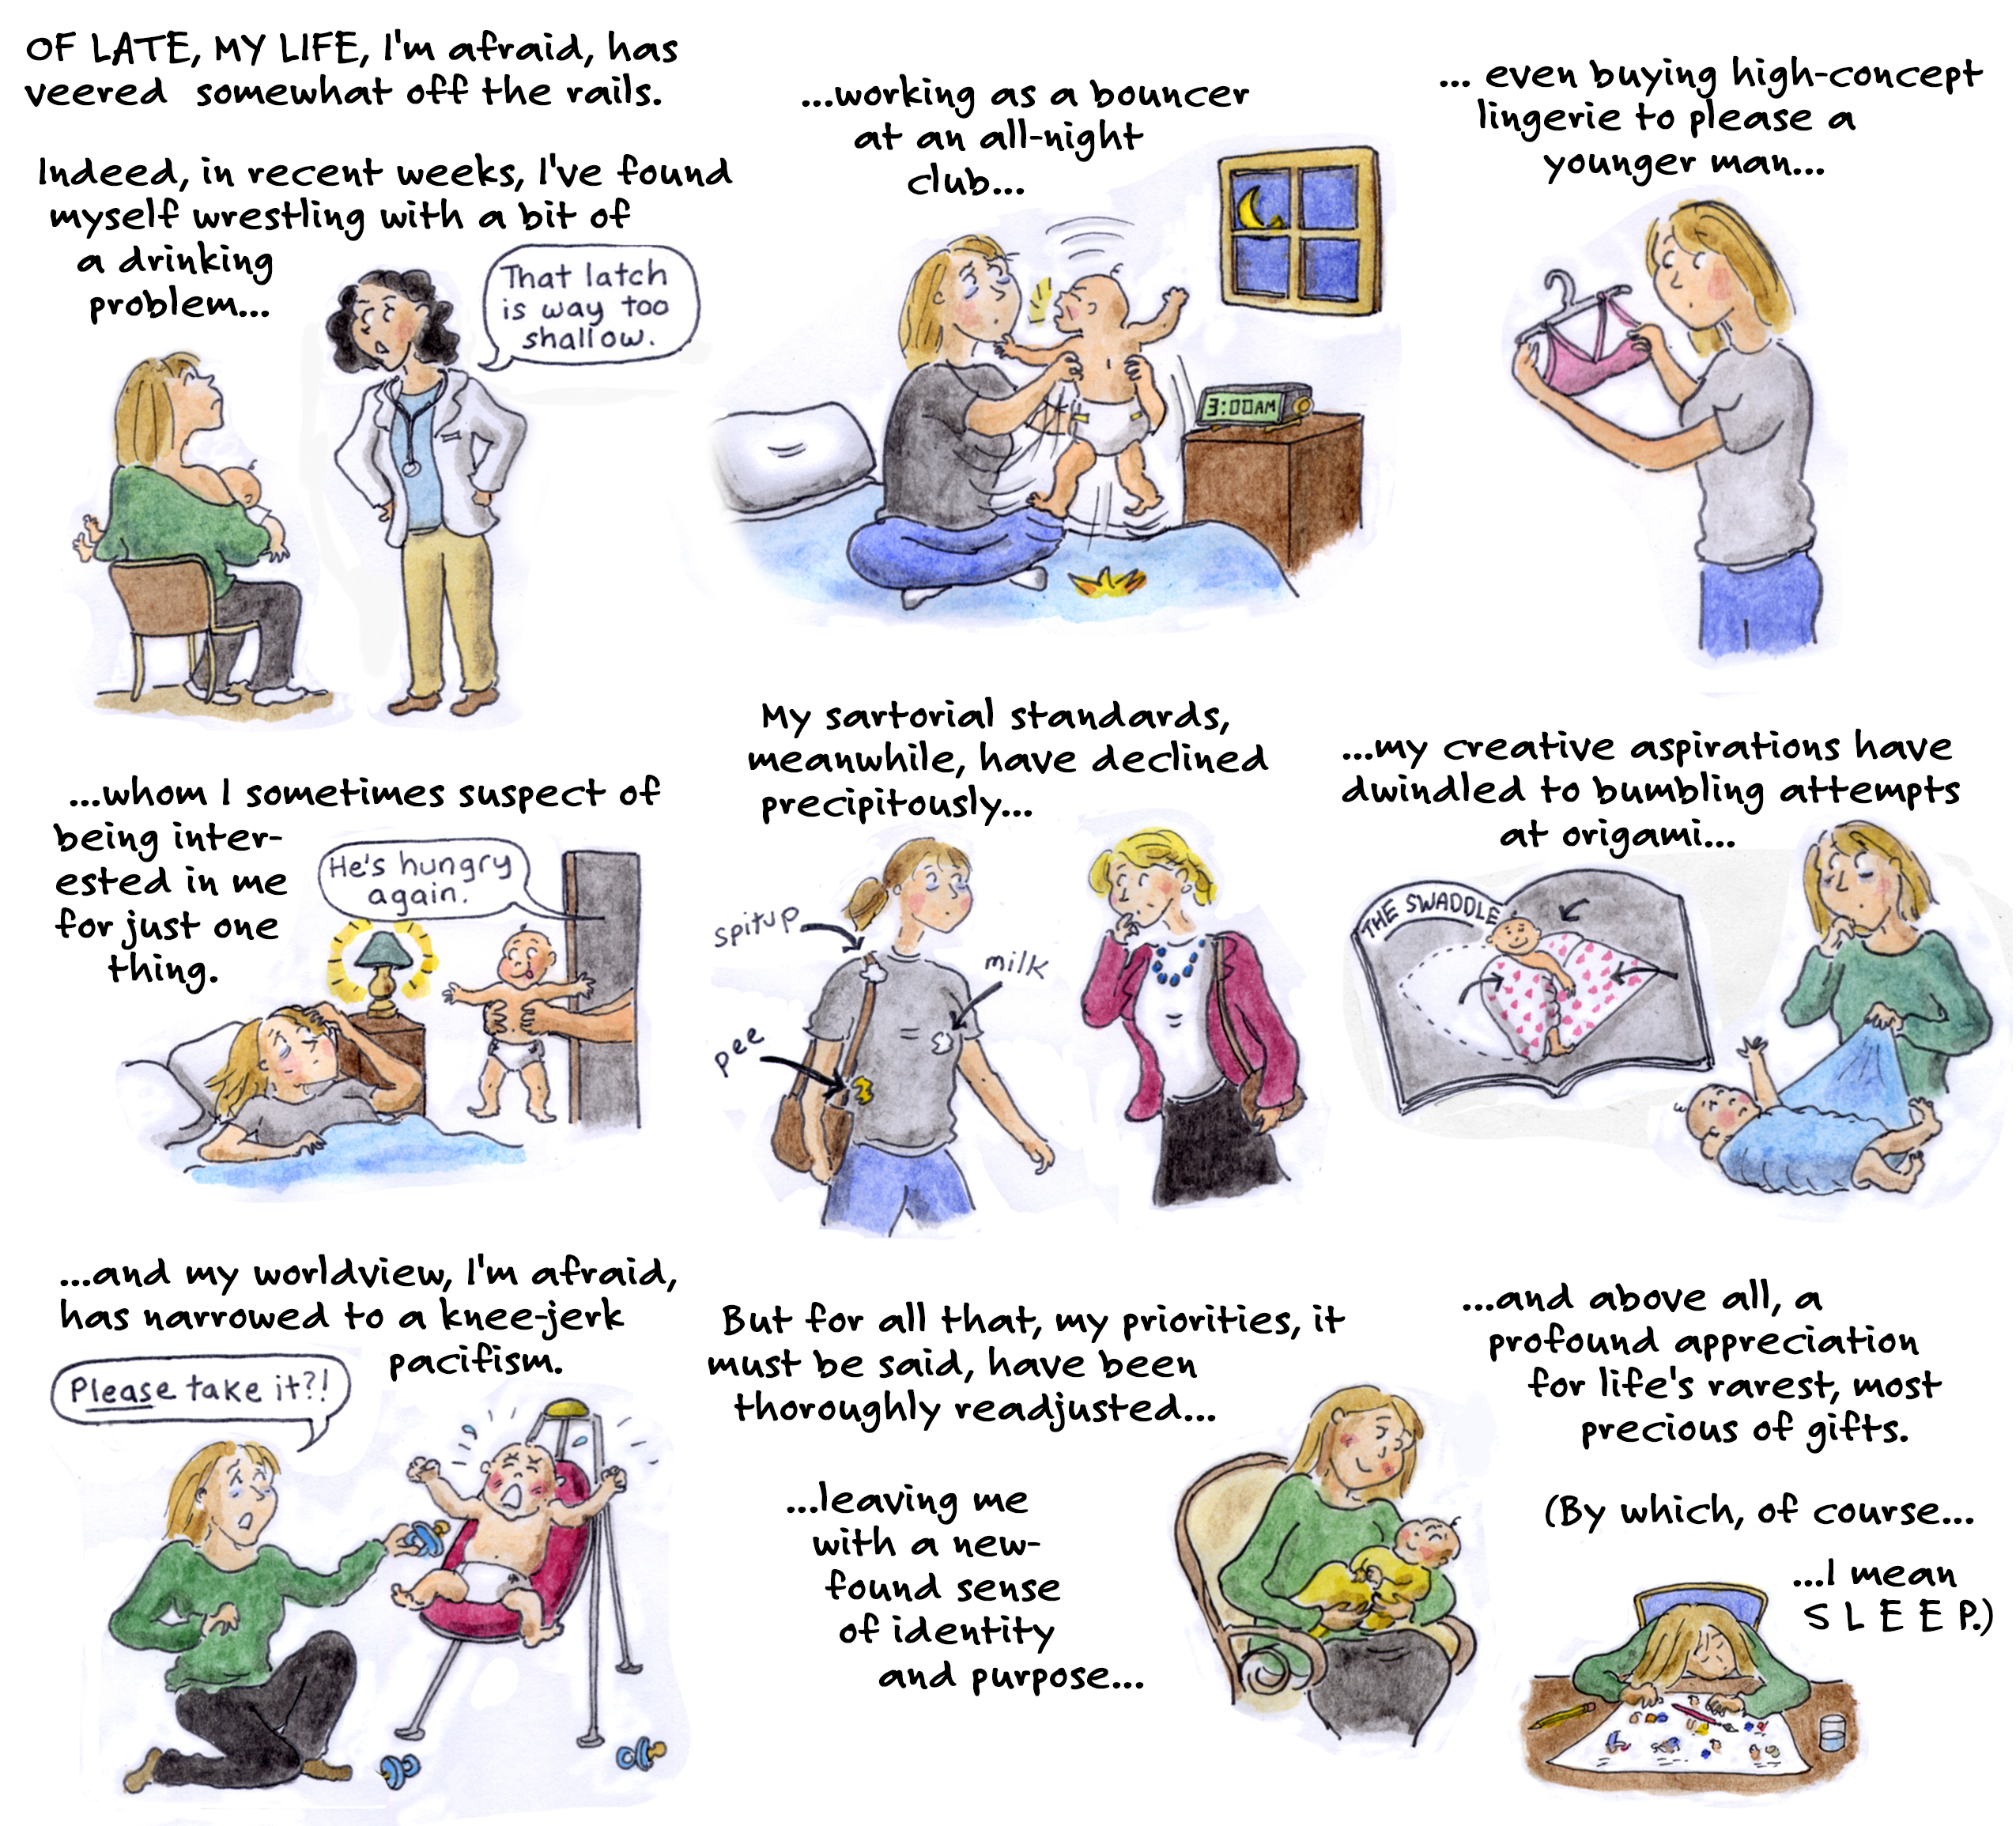 Life As A New Mom, Summed Up In A Cartoon | HuffPost Life